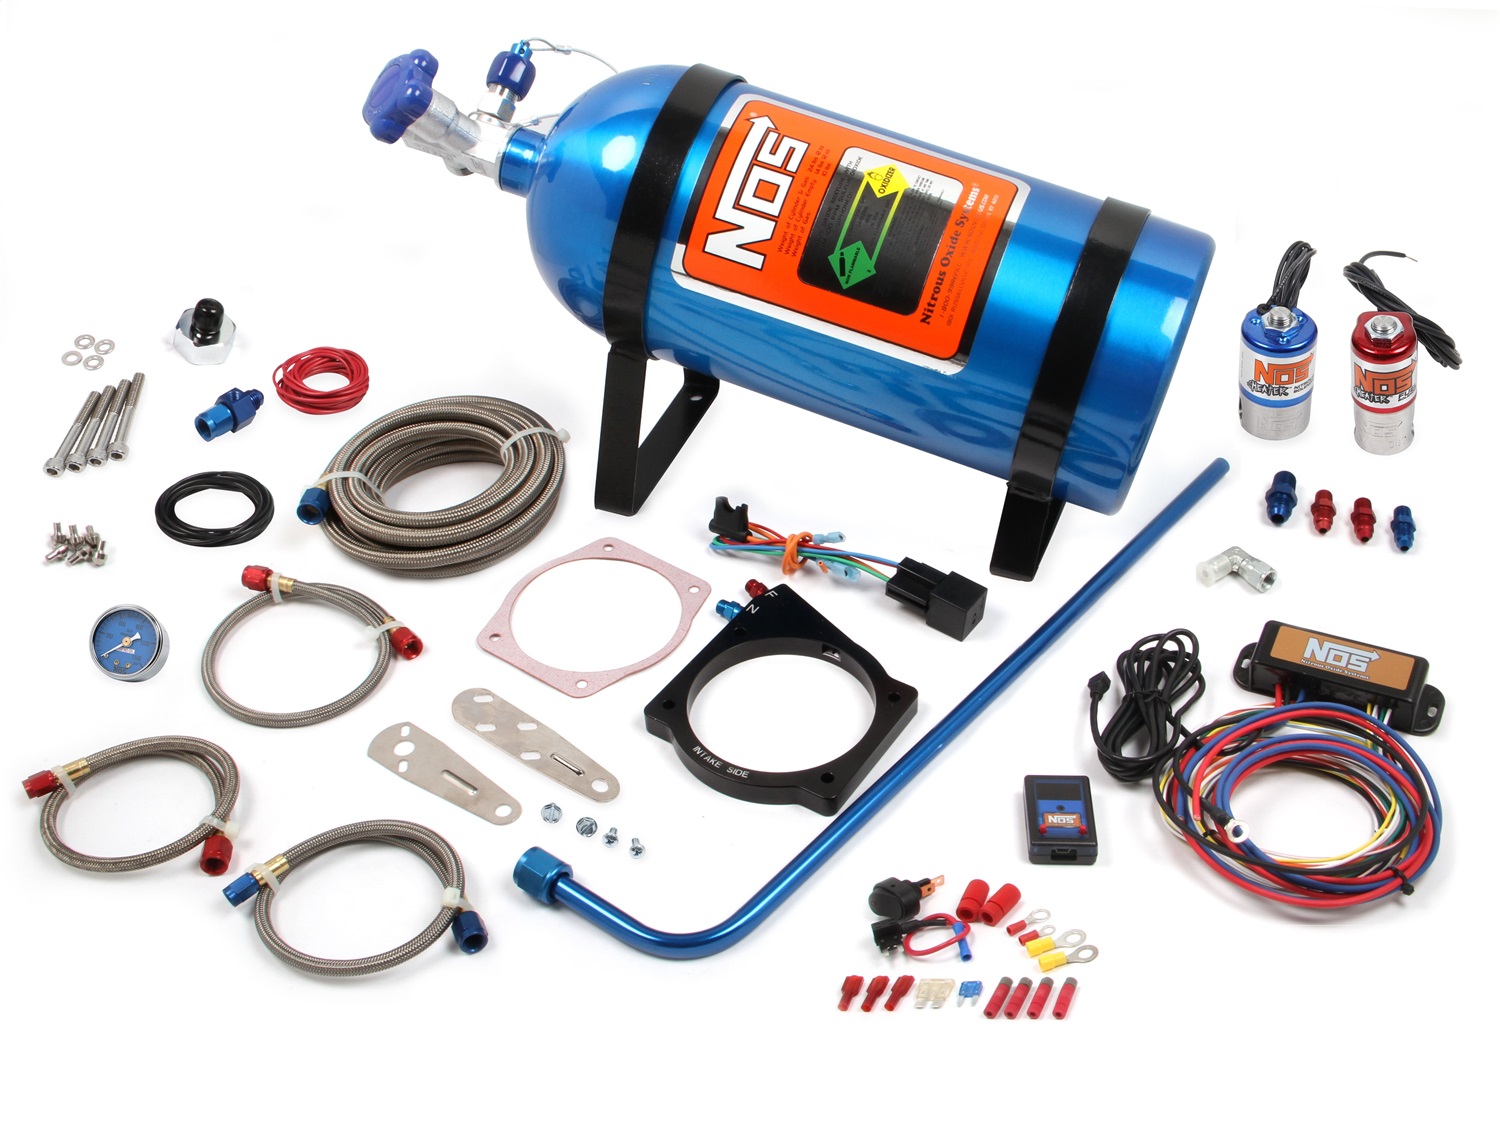 2014-2015 Chevrolet Camaro Nitrous Oxide Injection System Kit LS3 90MM NOS PLATE COMPLETE DBW KIT